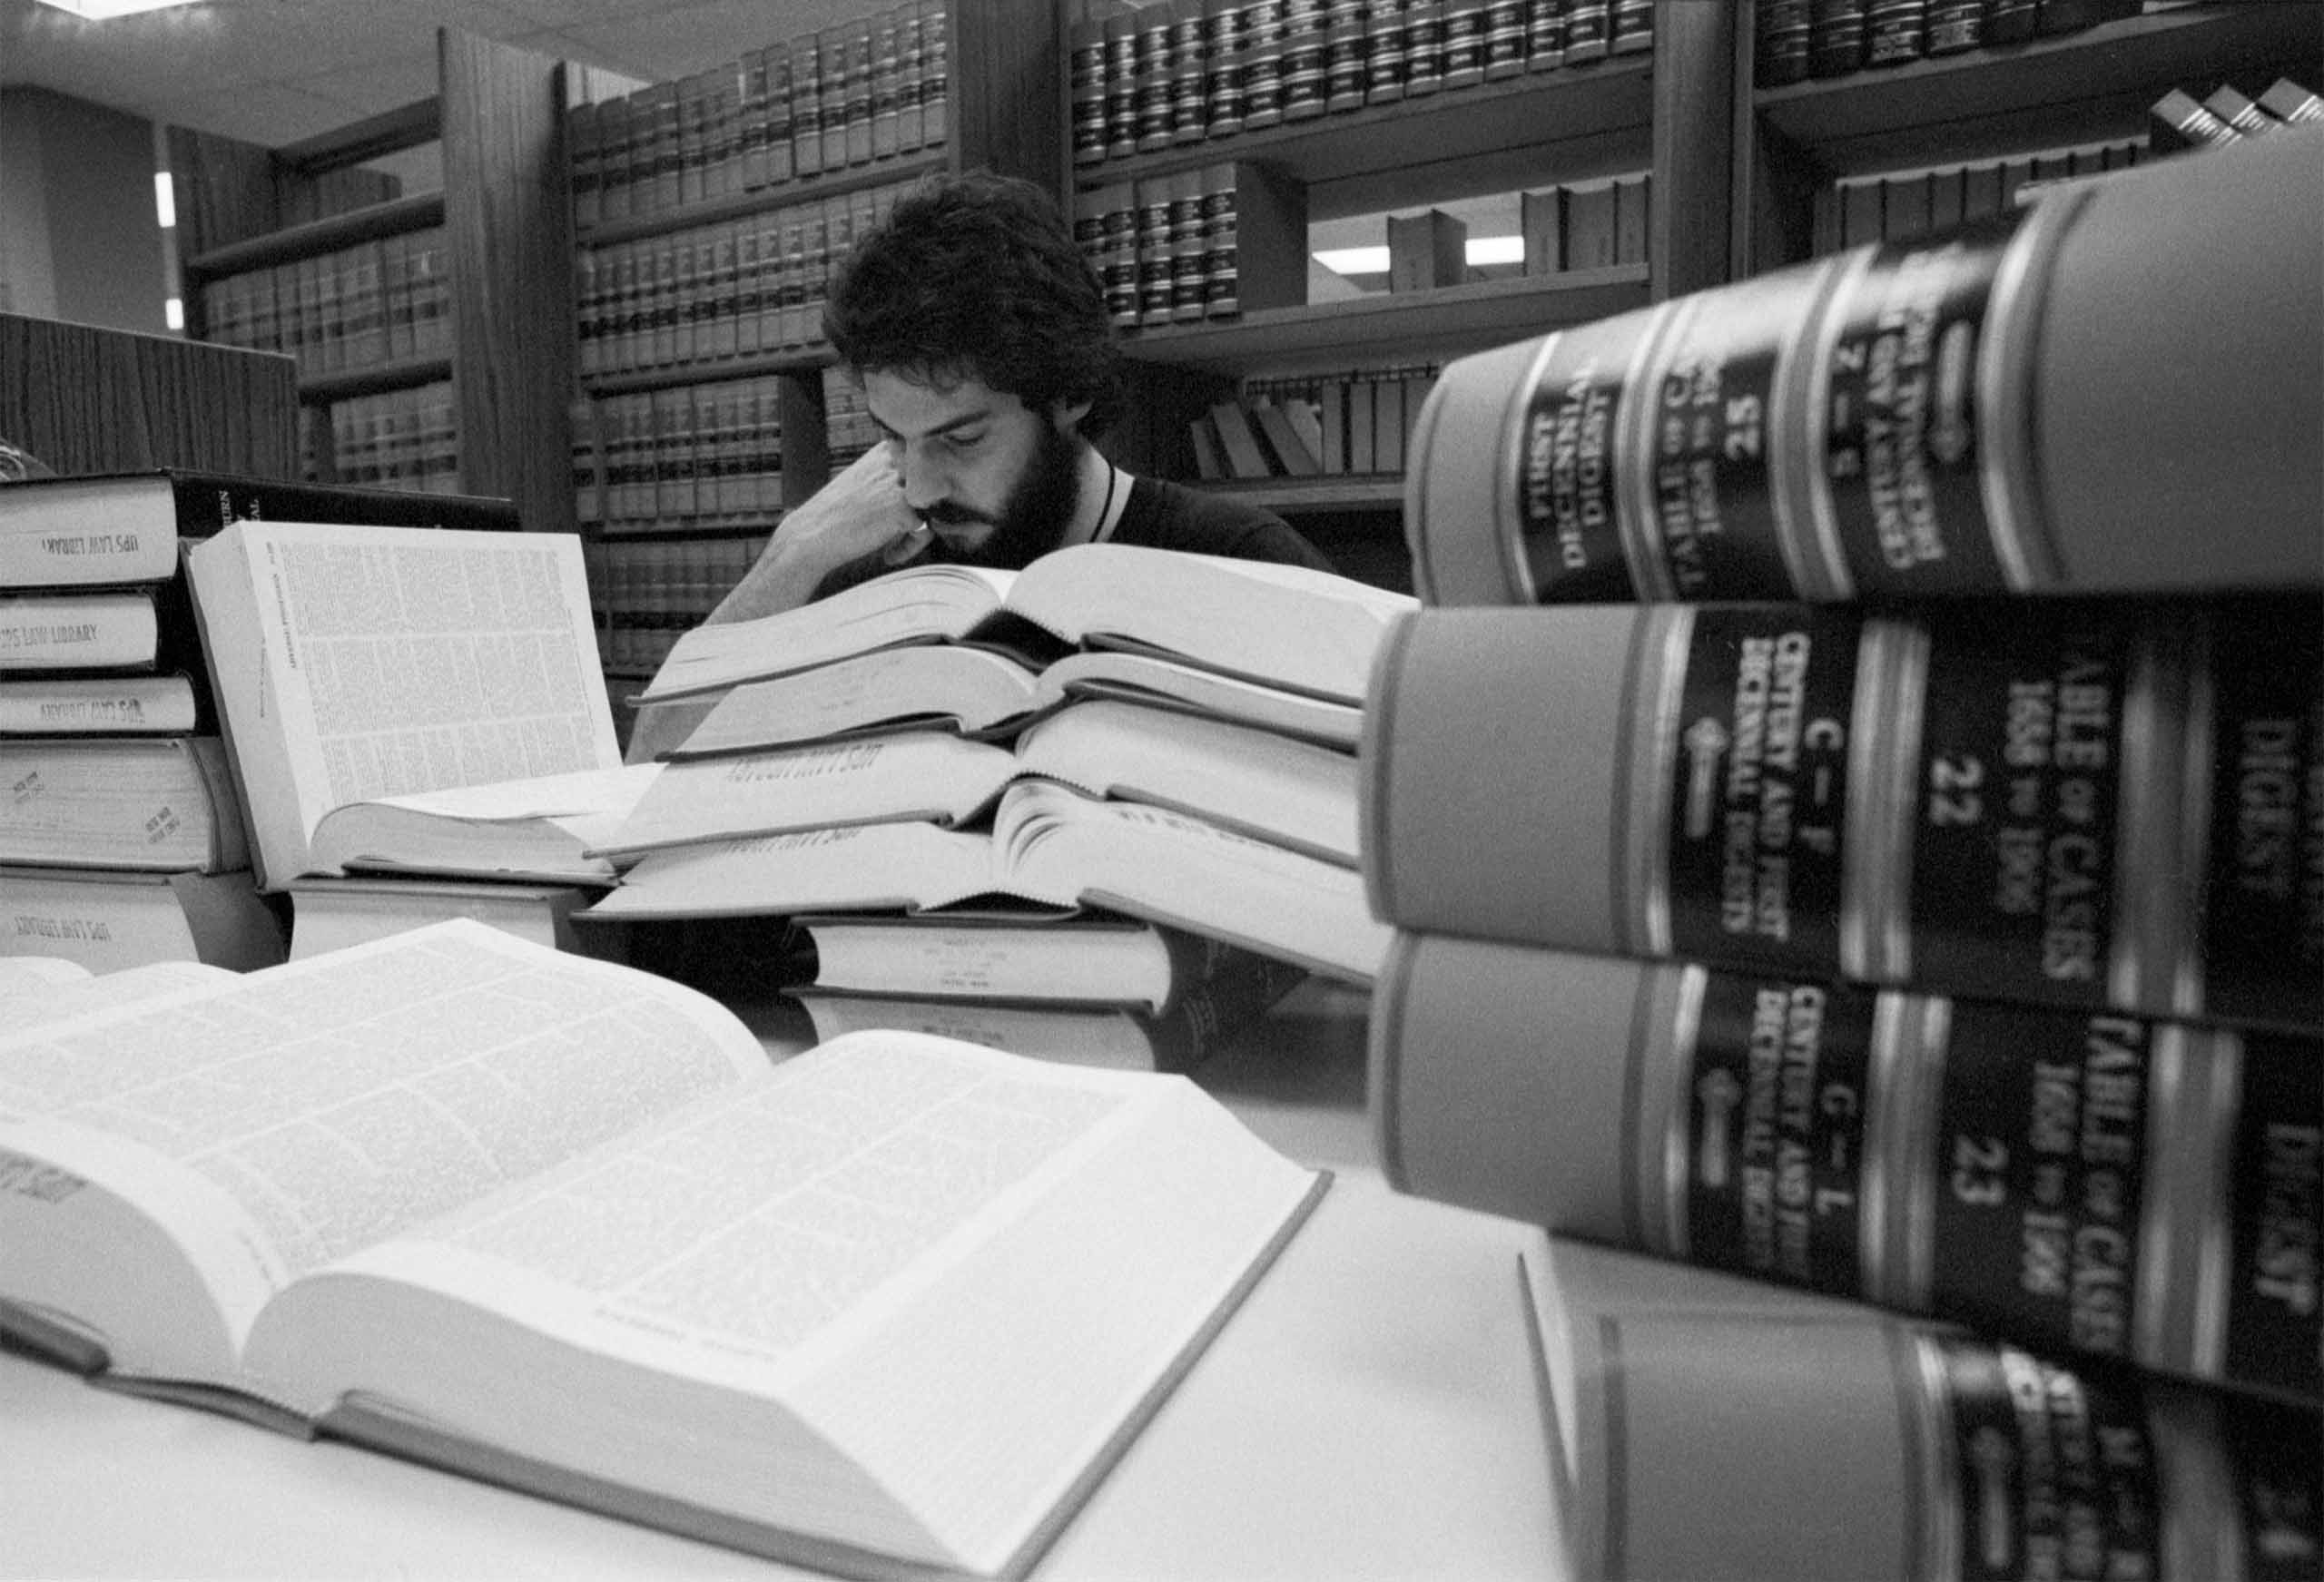 Benaroya Business Park - A person at a desk behind a stack of law books